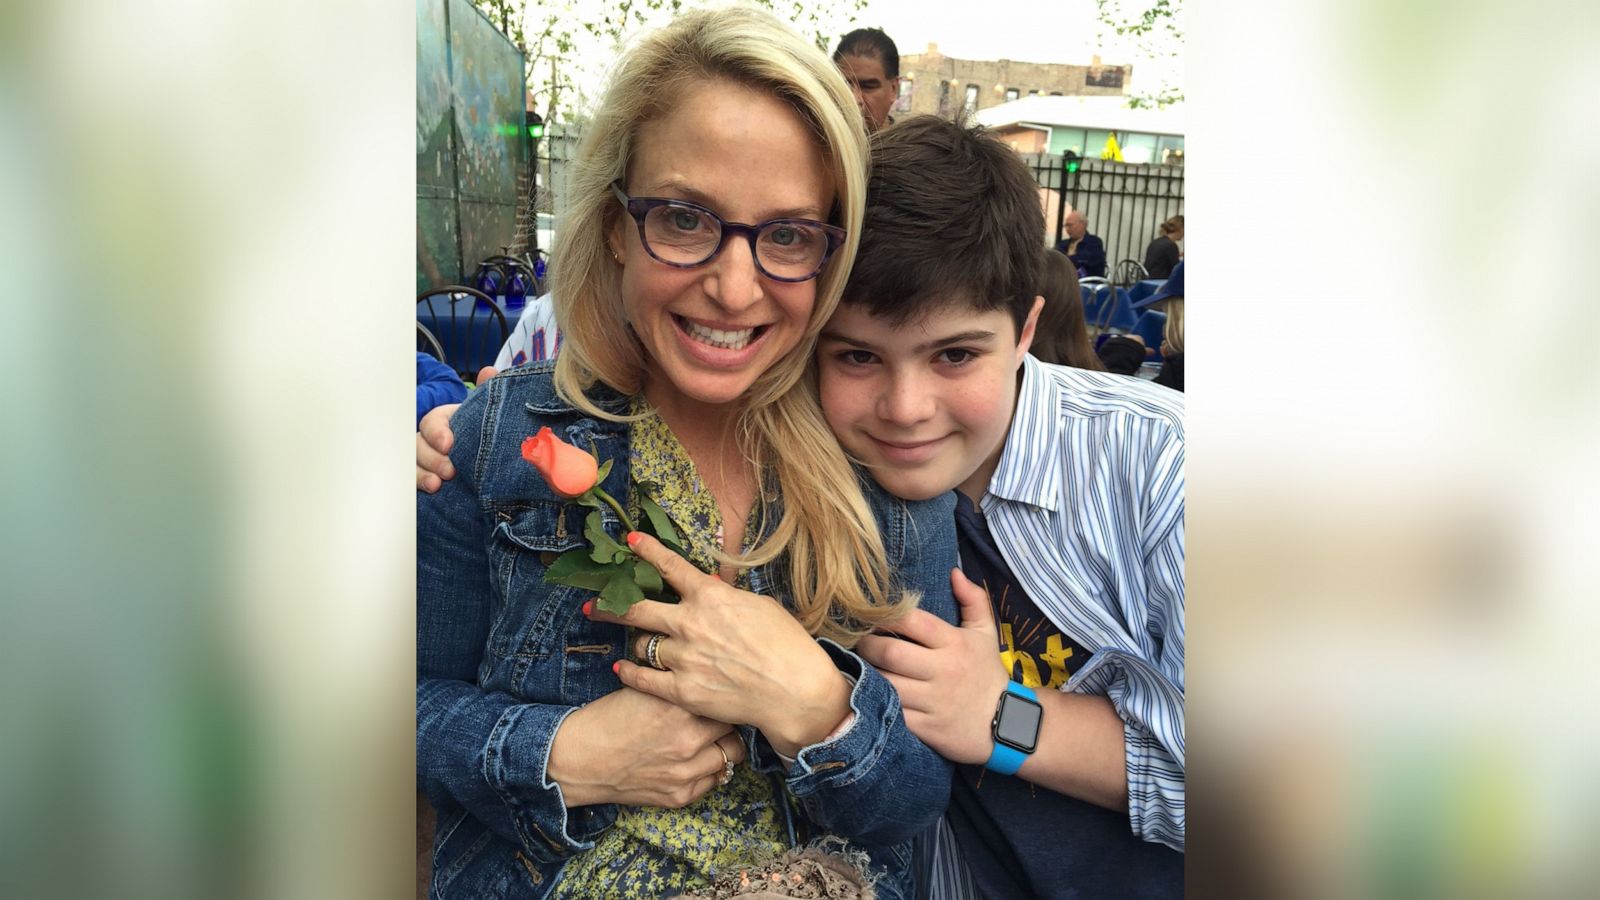 PHOTO: Laura Berman is pictured with her son Sammy, who died in 2021 at the age of 16.